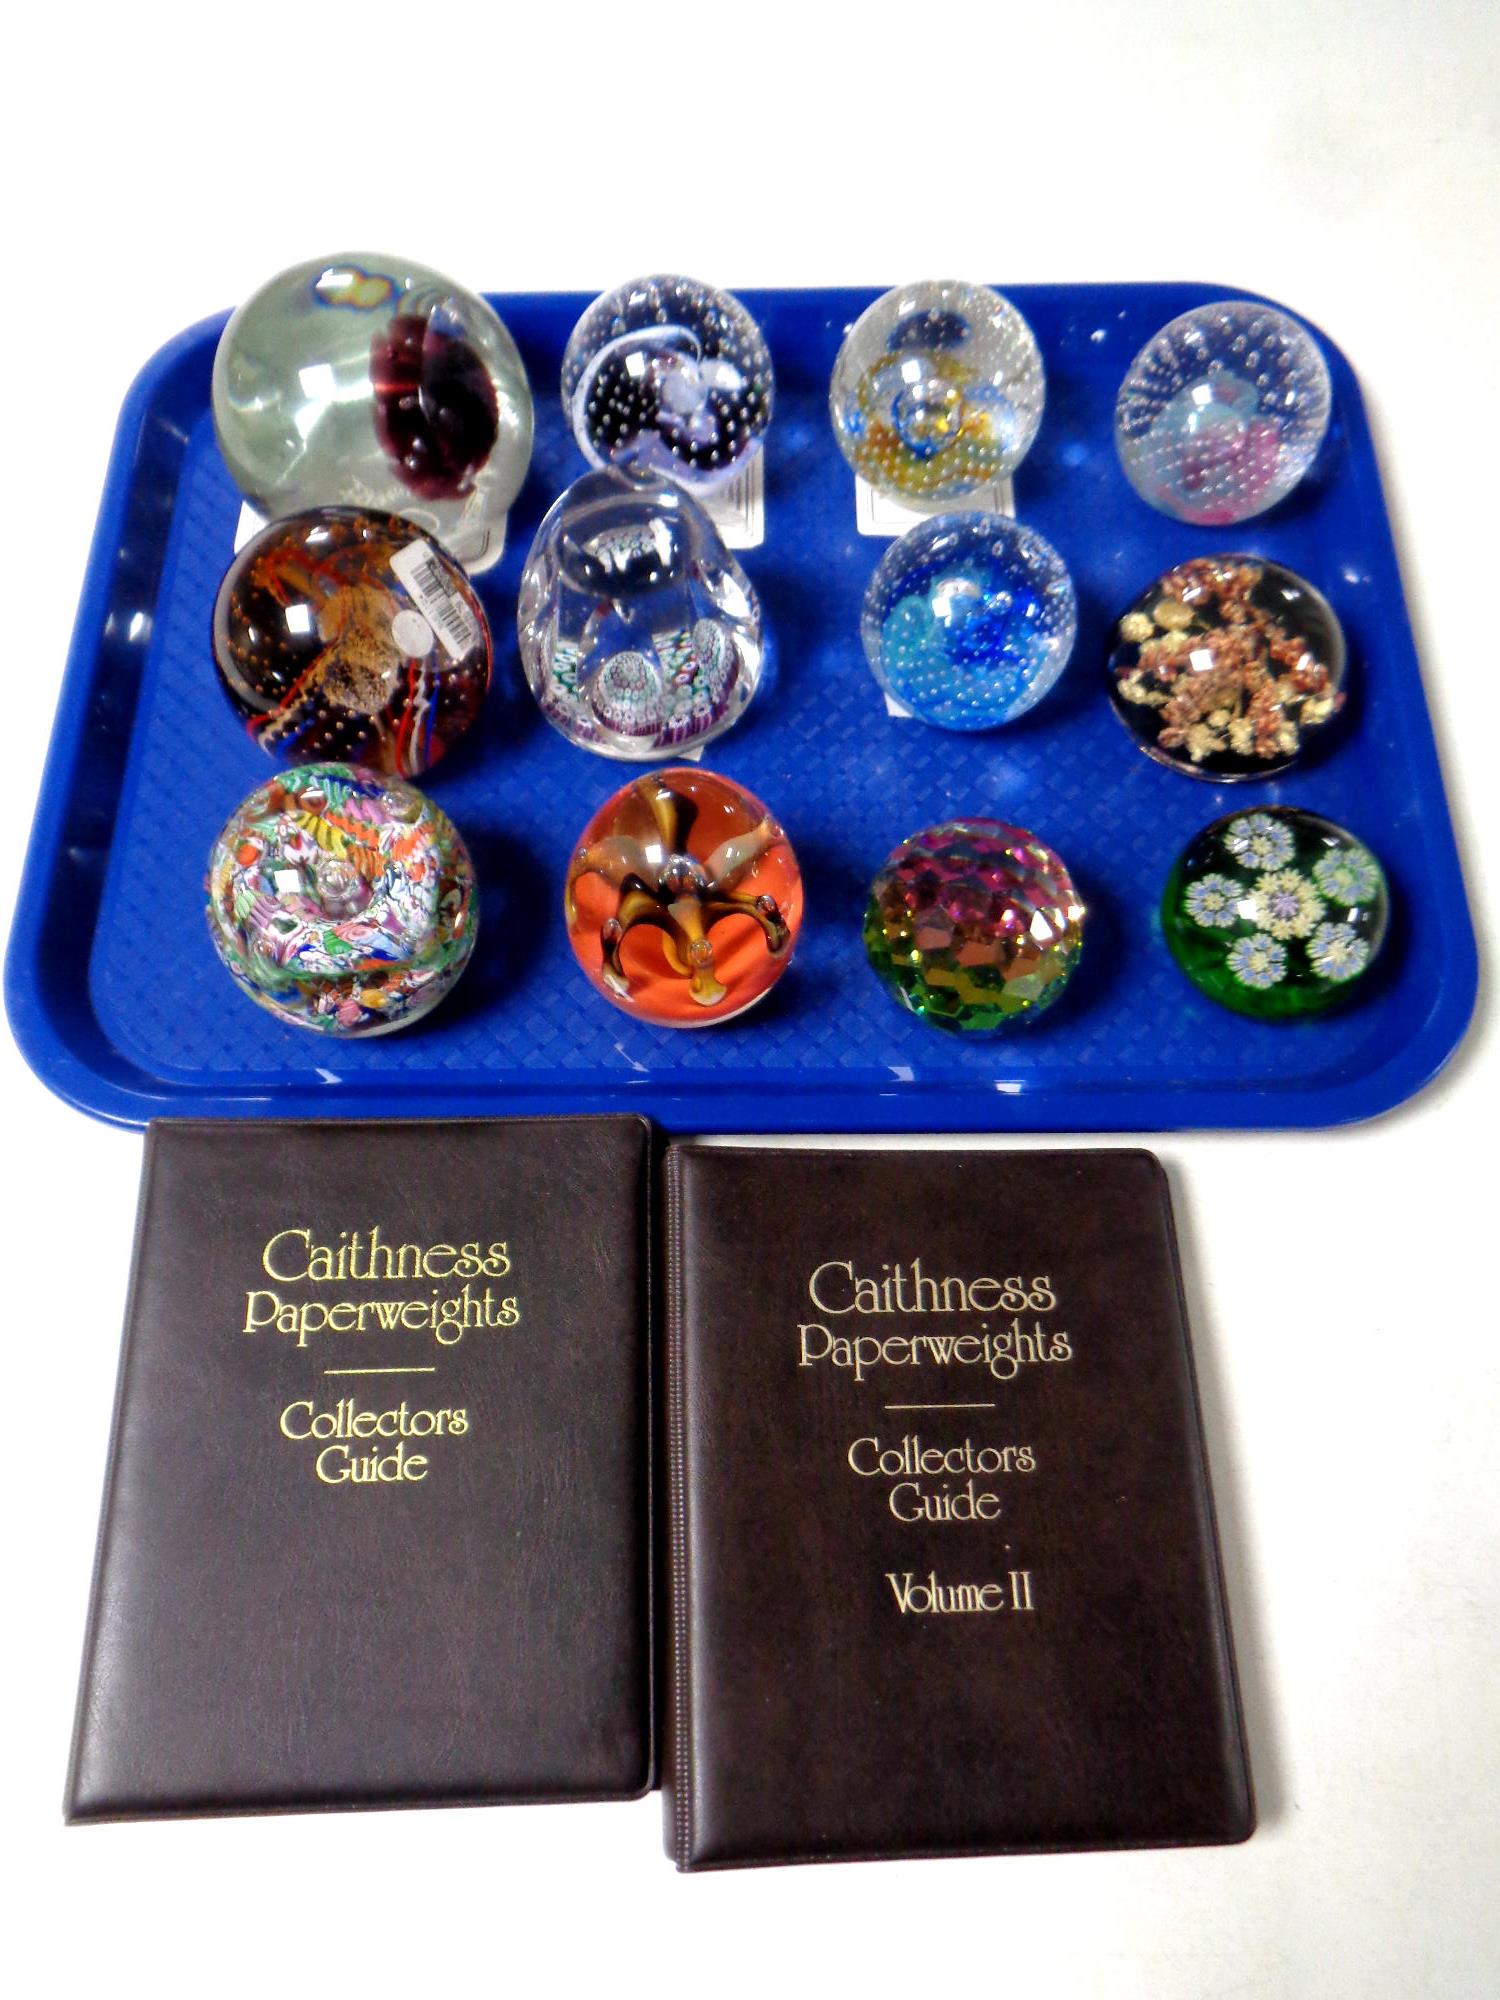 A tray of twelve assorted Caithness and crystal paperweights and two Caithness paperweights